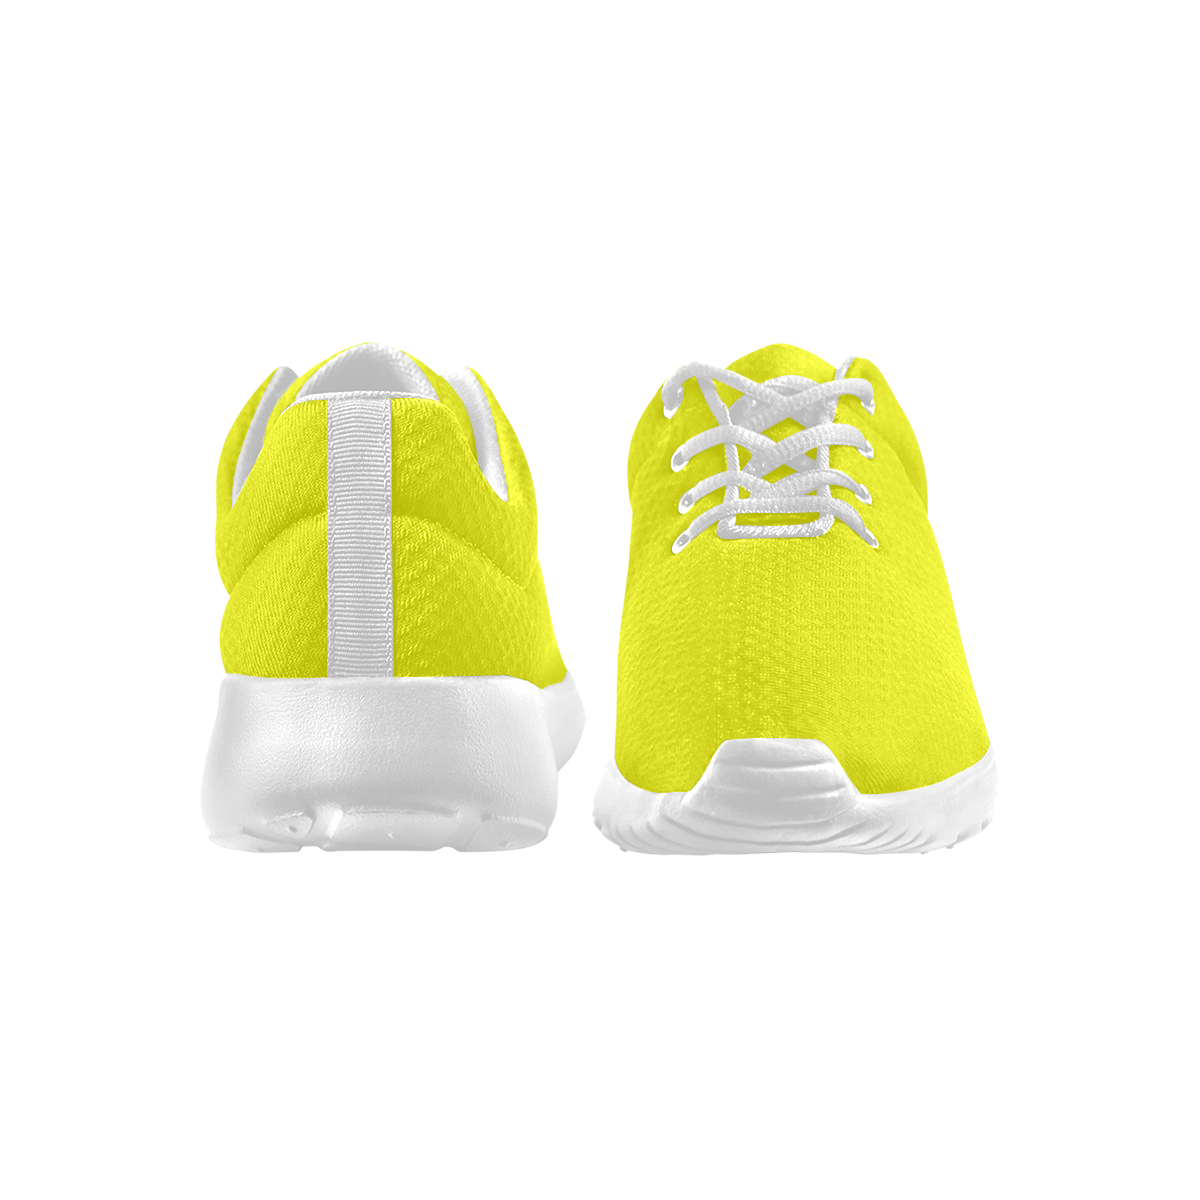 Bright Neon Yellow / White Women's Athletic Shoes (Model 0200)